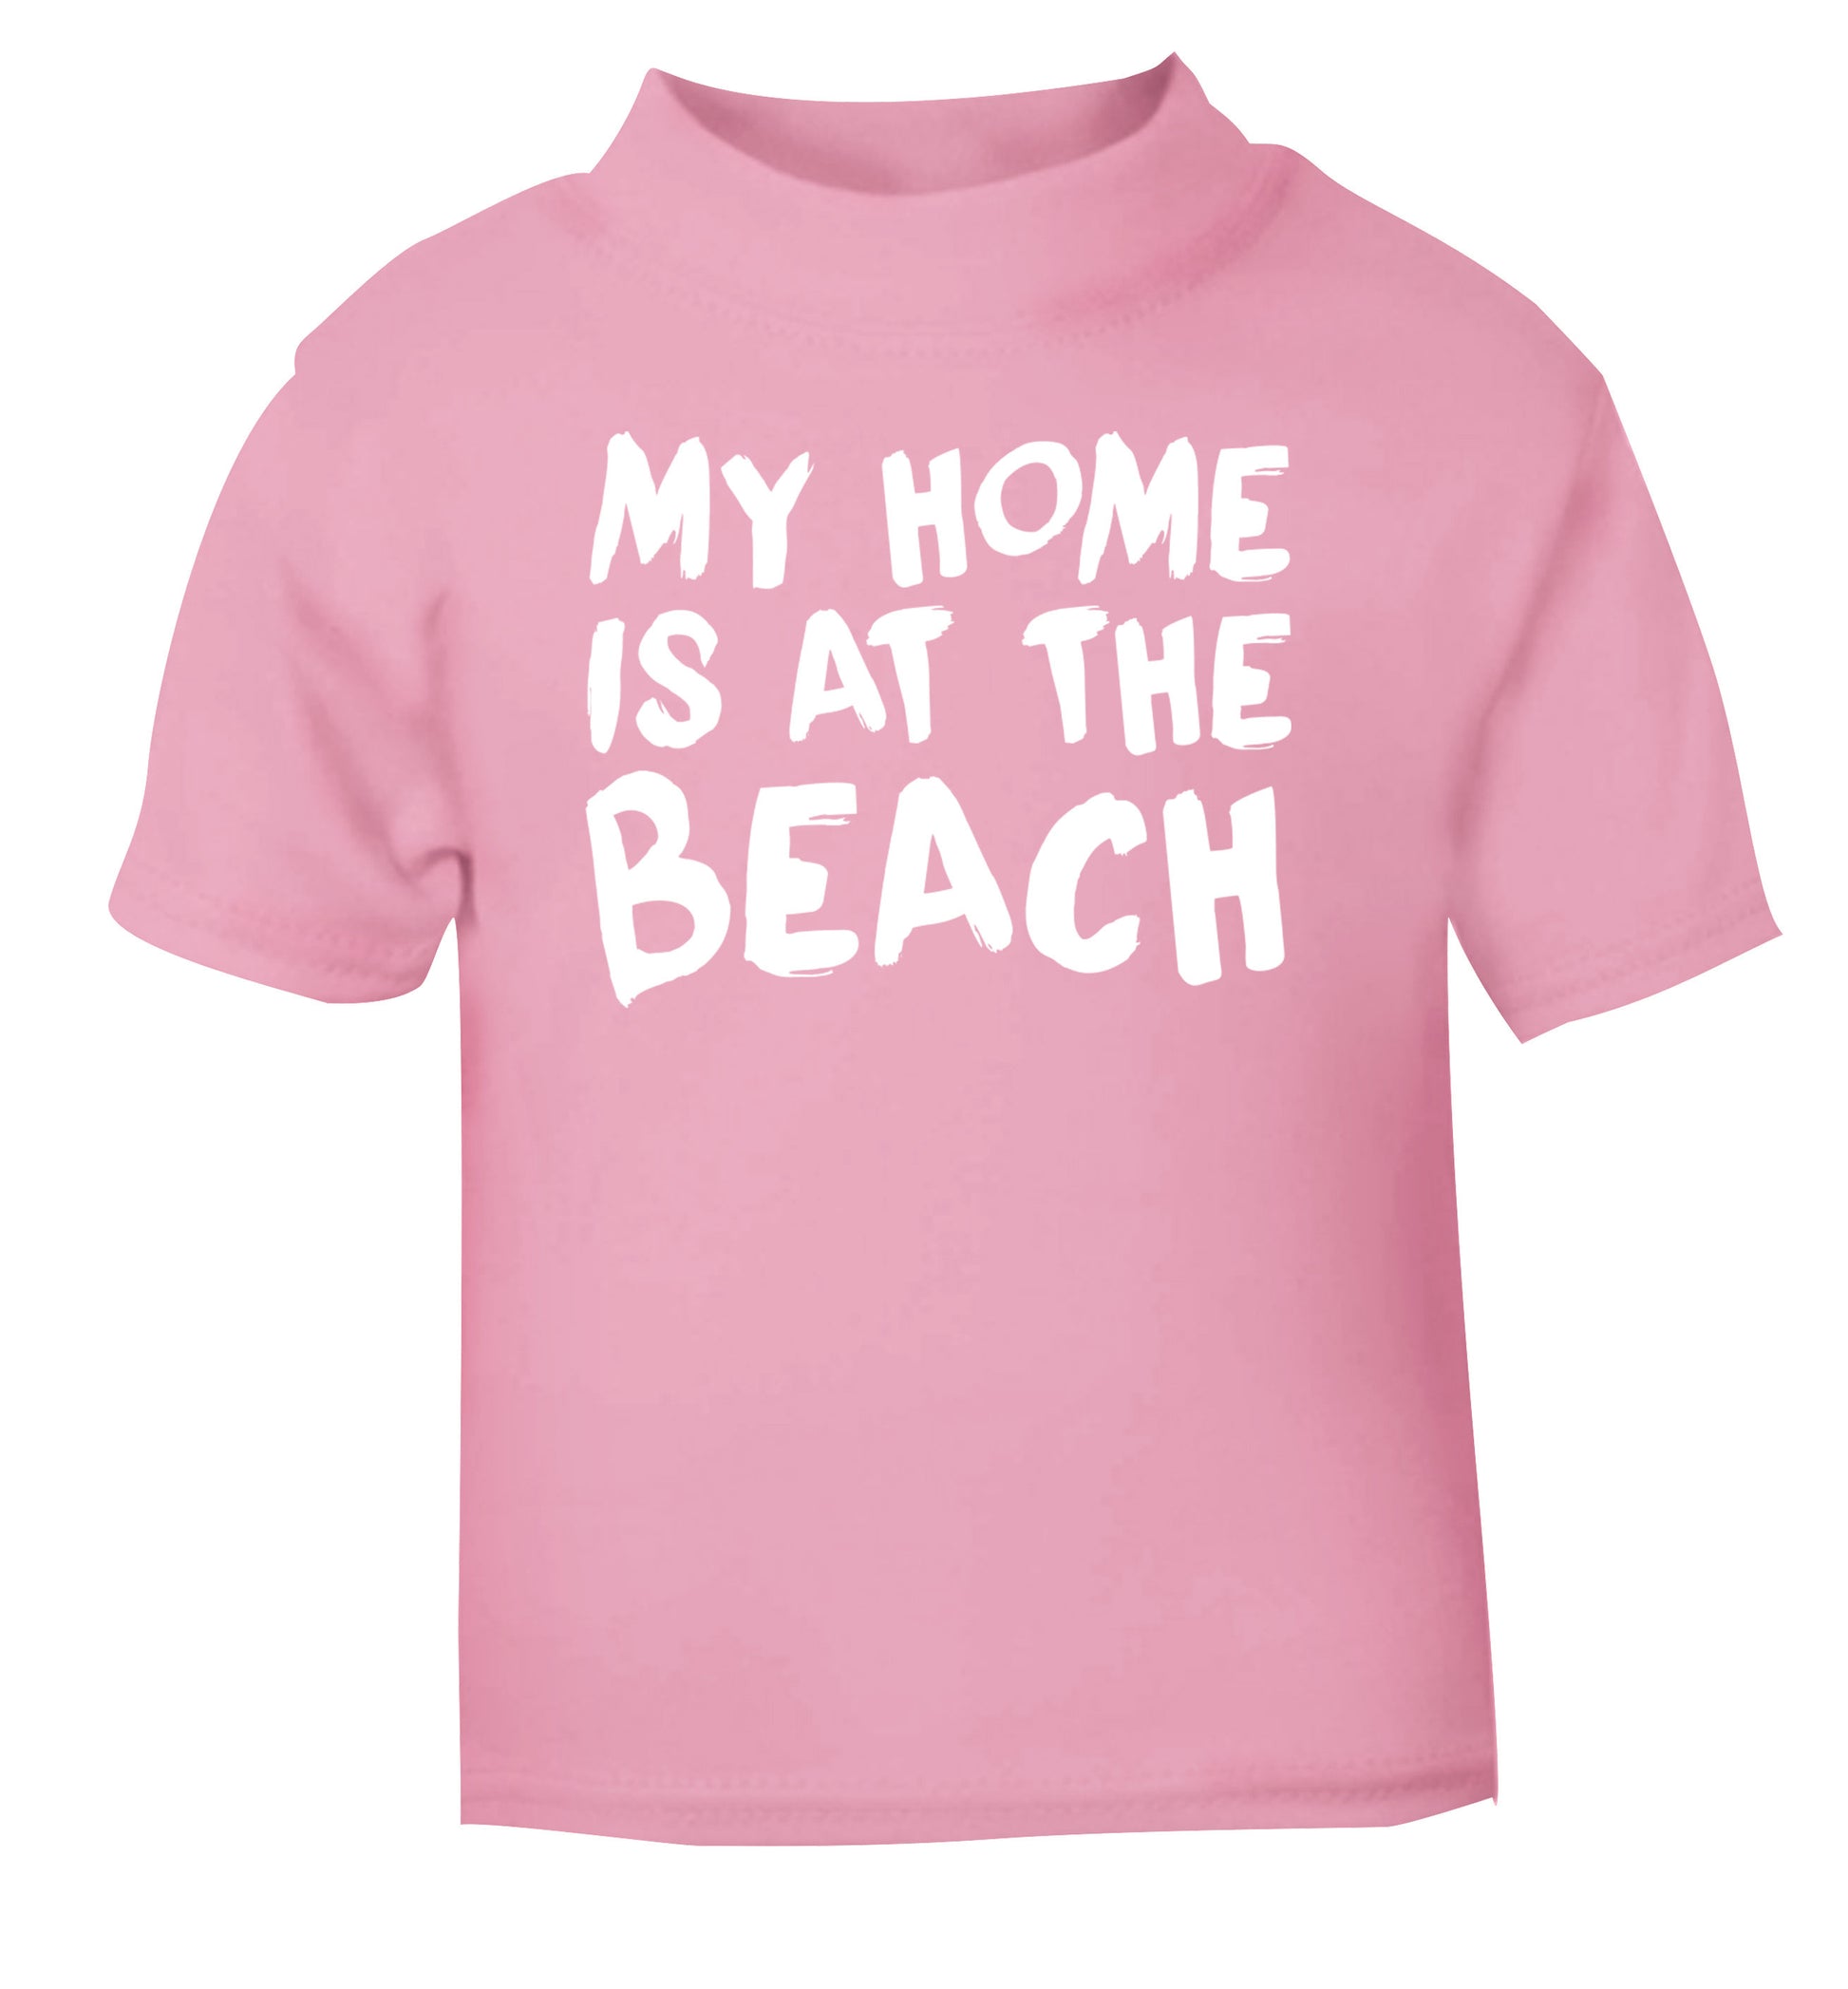 My home is at the beach light pink Baby Toddler Tshirt 2 Years